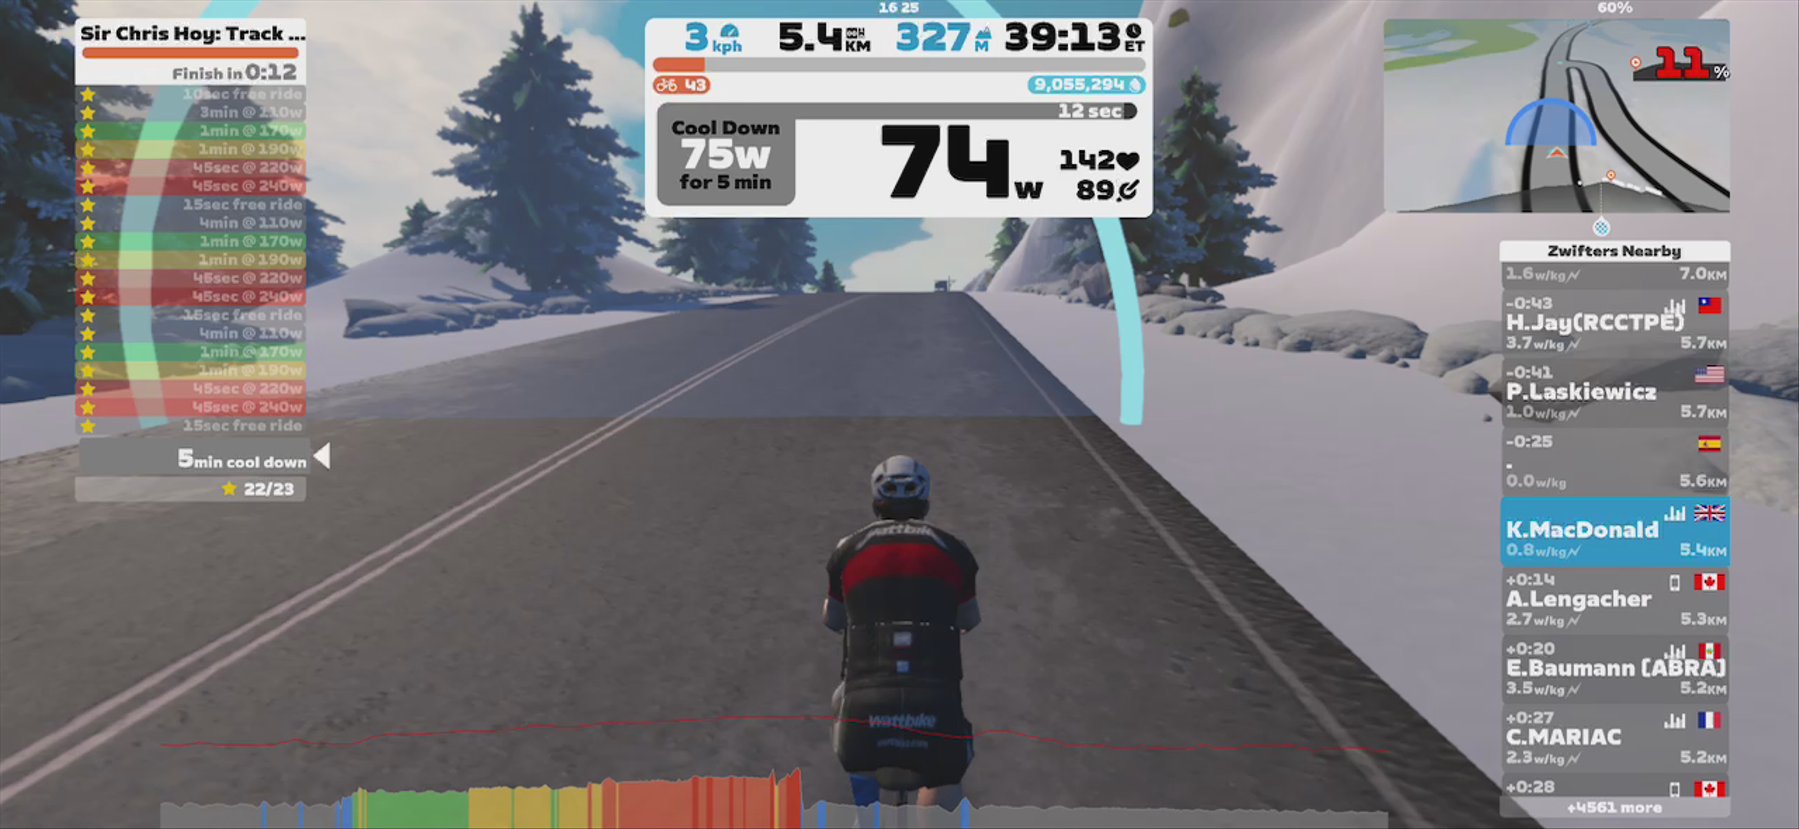 Zwift - Sir Chris Hoy: Track Sprints in Watopia